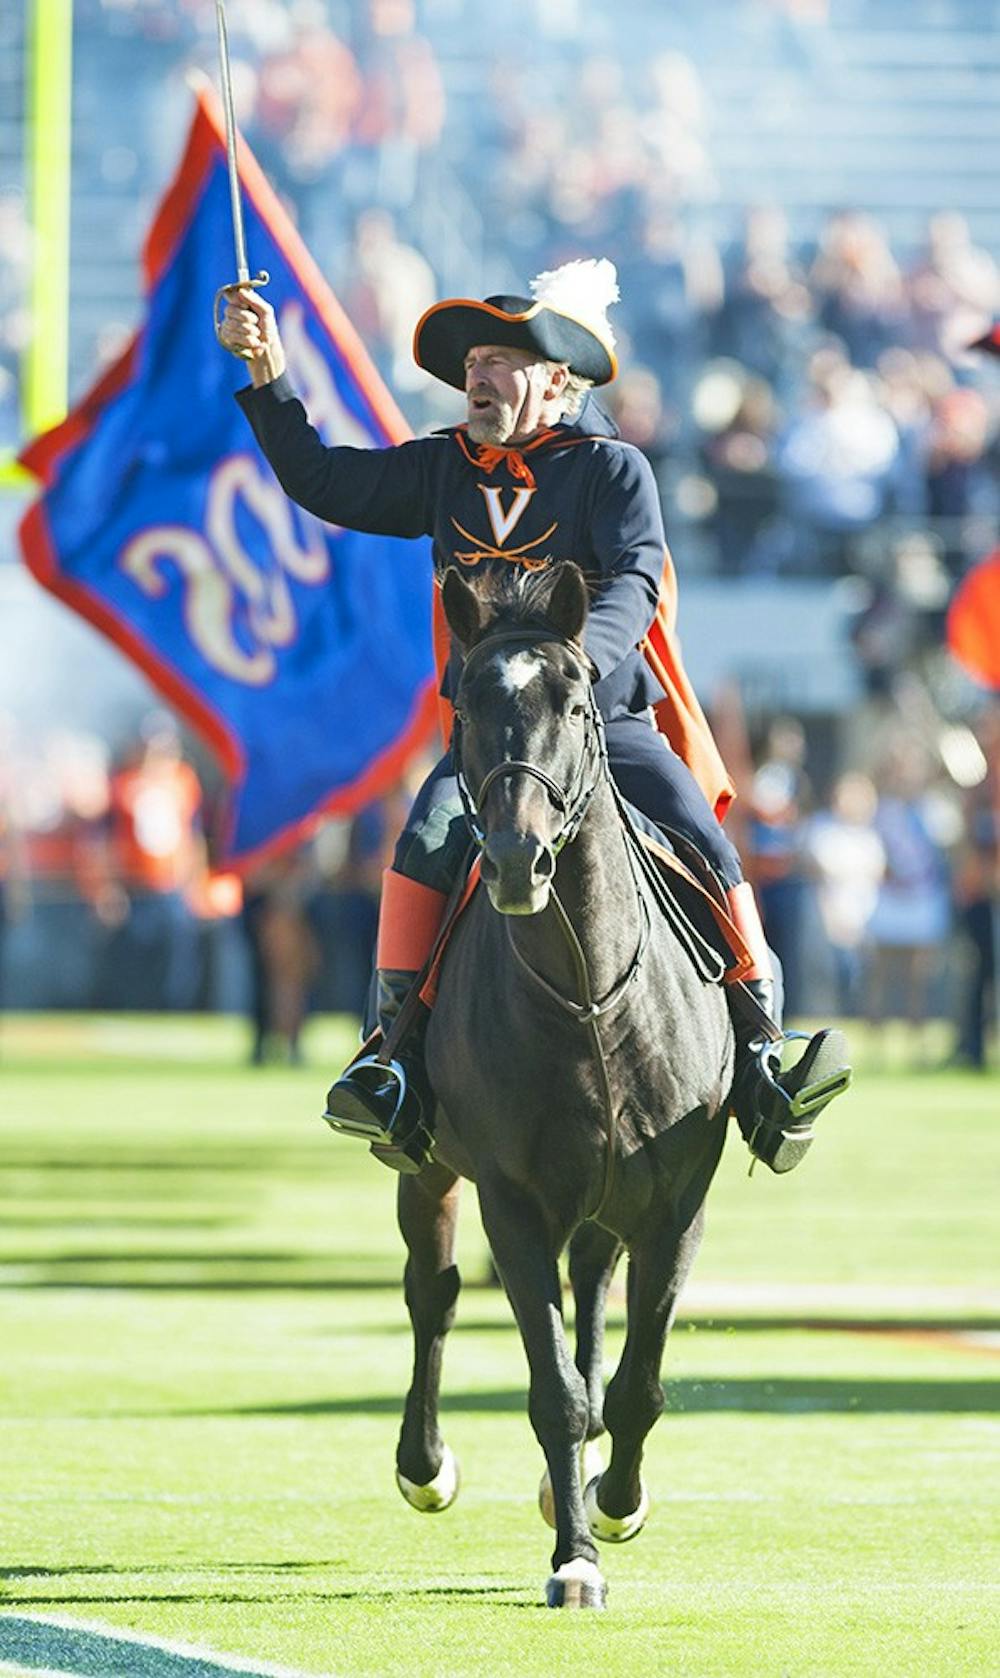 <p>Though CavMan will continue to ride into Scott Stadium before games, his animated representation in "The Adventures of CavMan" will no longer be a part of Virginia football Saturdays</p>